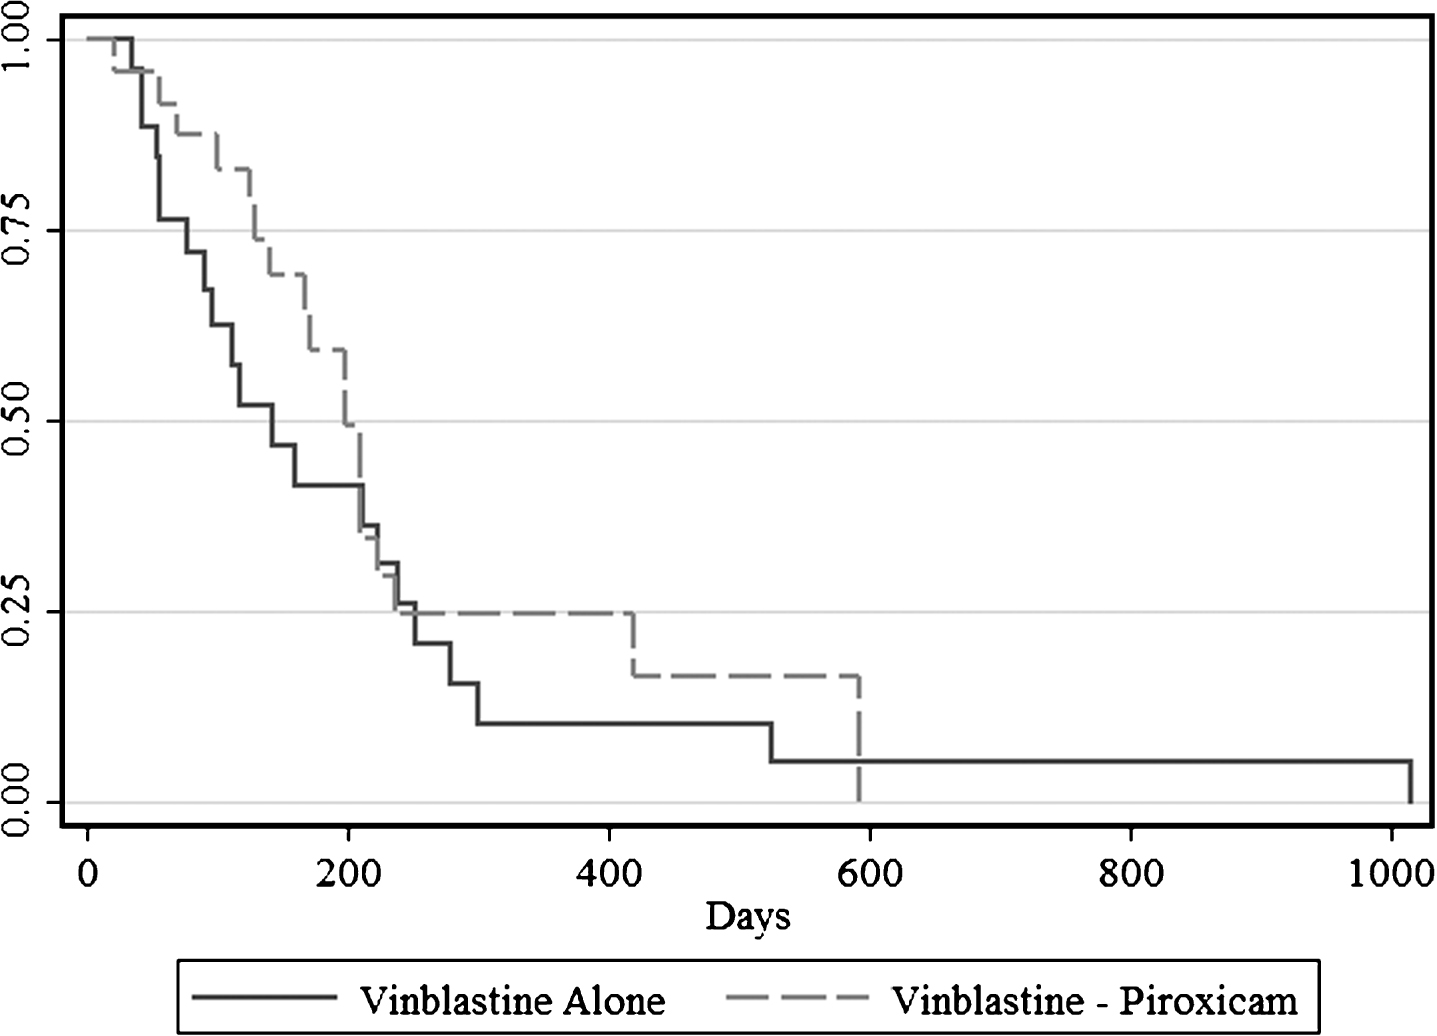 Progression free interval (PFI) for dogs receiving vinblastine alone and dogs receiving vinblastine and piroxicam simultaneously. The median PFI was 143 days in dogs receiving vinblastine alone and 199 days in dogs receiving the combination treatment (P = 0.128).